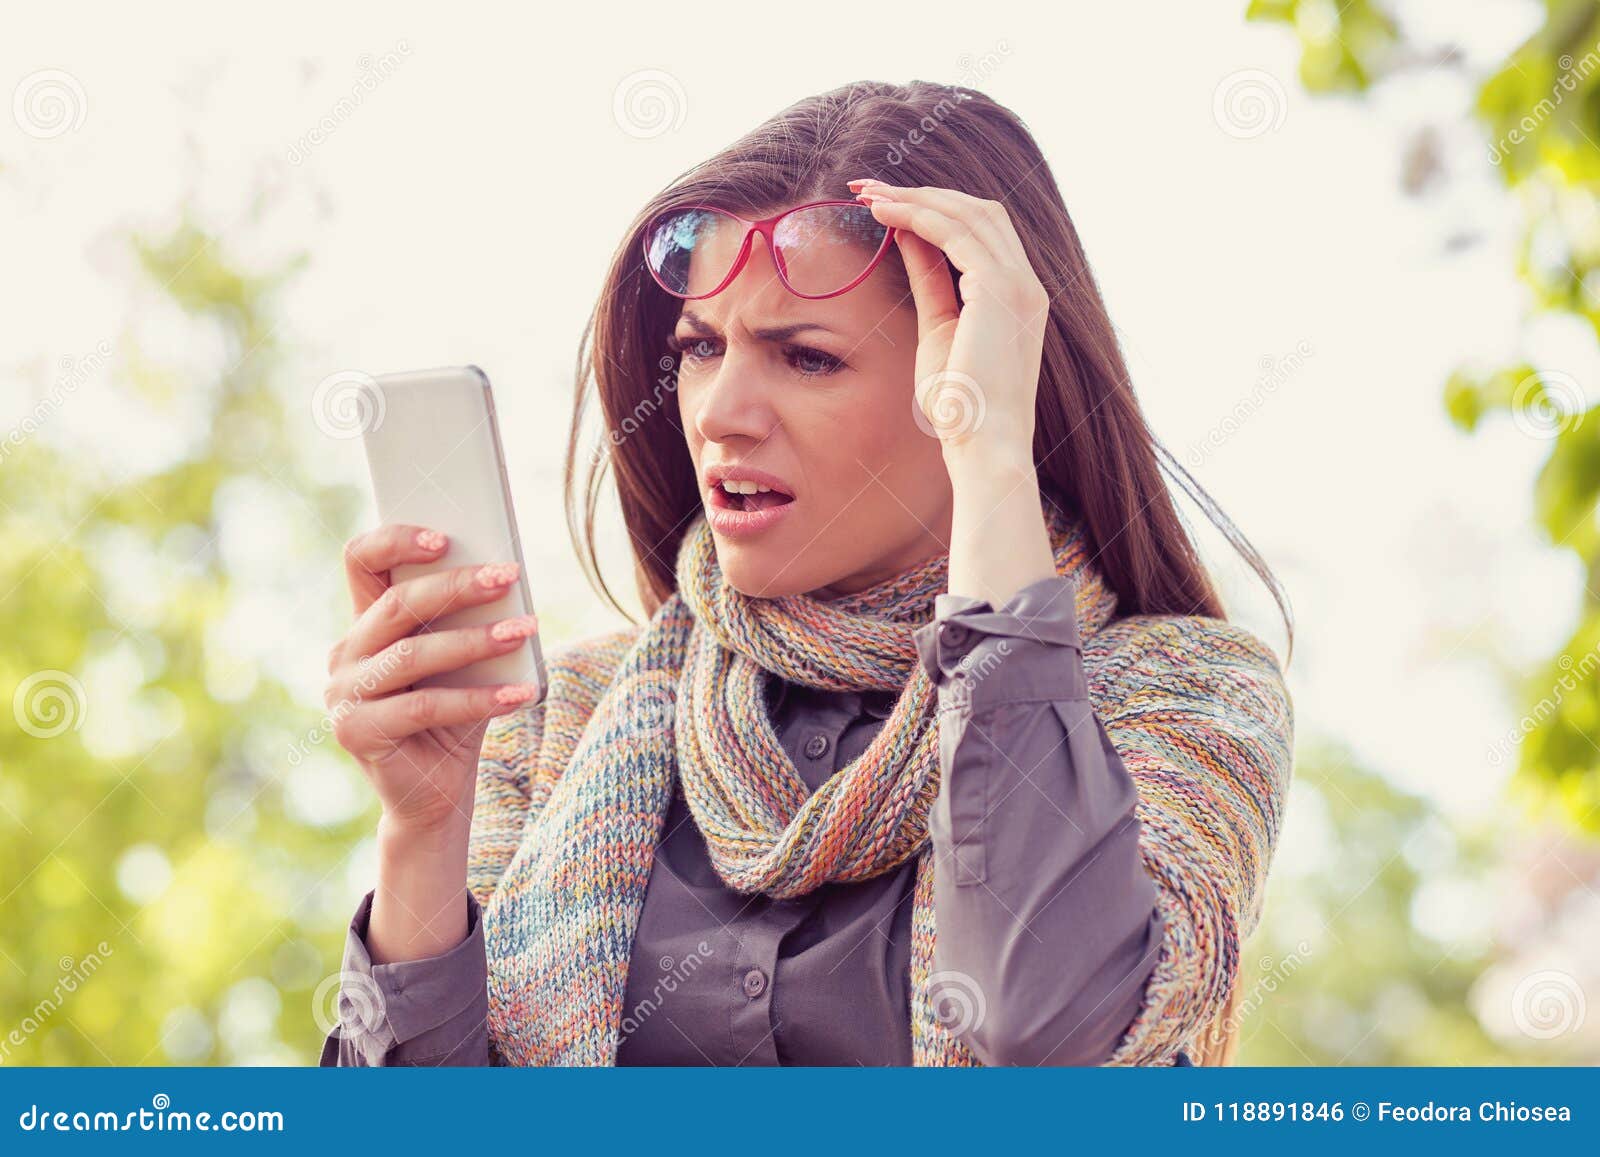 annoyed upset woman in glasses looking at her smart phone with frustration while walking on a street